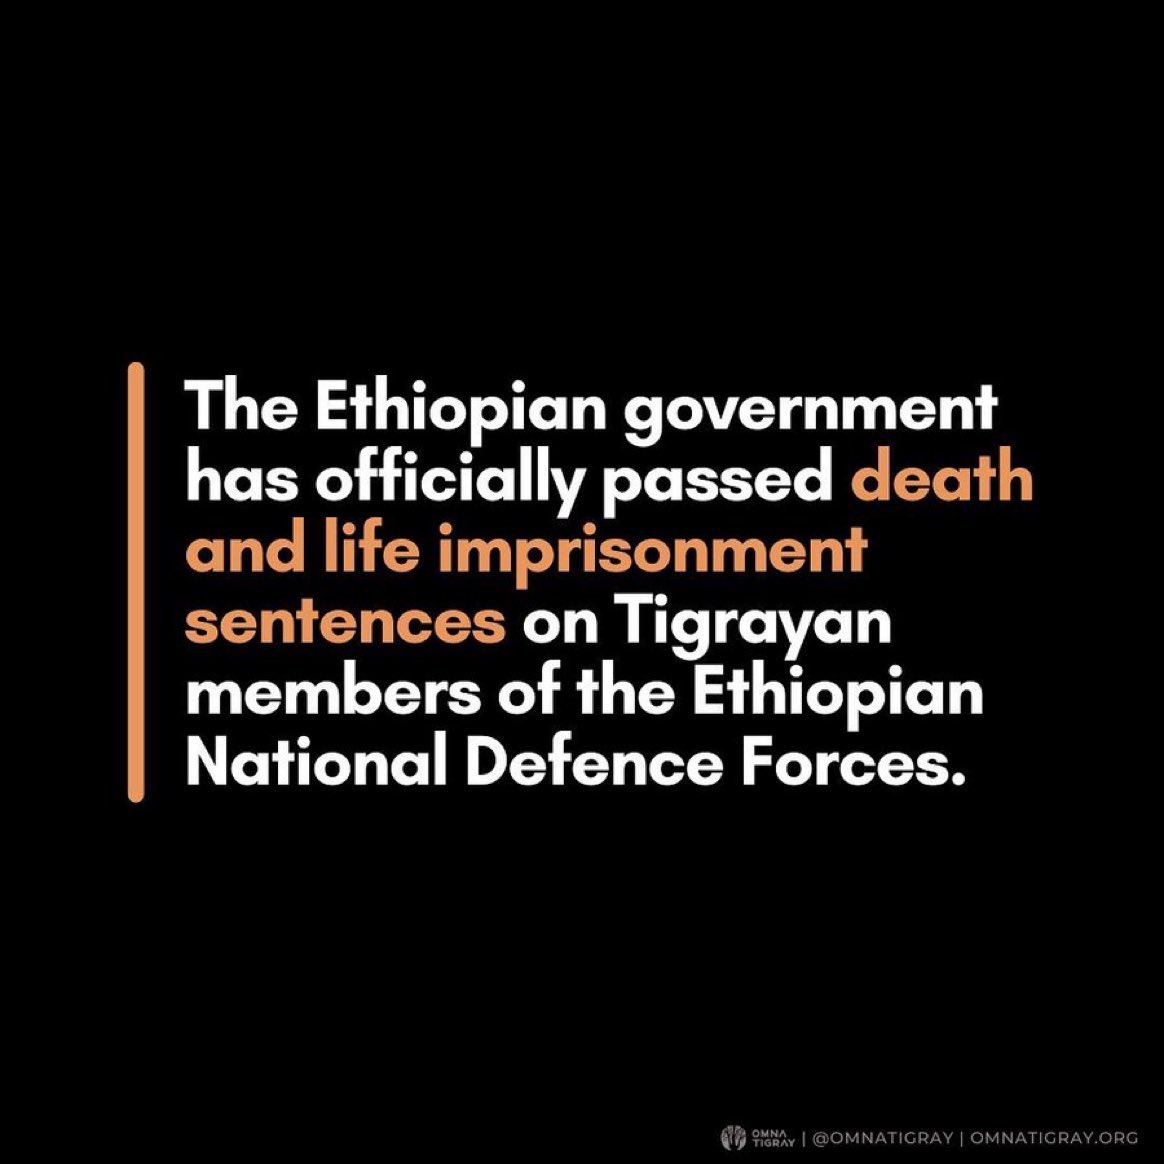 '...at least 83 Tigrayan former ENDF patriots were killed in Arba Minch concentration camps. This does not include a massacre in Awash arba, Jigjiga & other concentration camps. #TigrayGenocide @UN_HRC @antonioguterres @LaetitiaBader @MikeHammerUSA #EU twitter.com/RealHauleGluck…